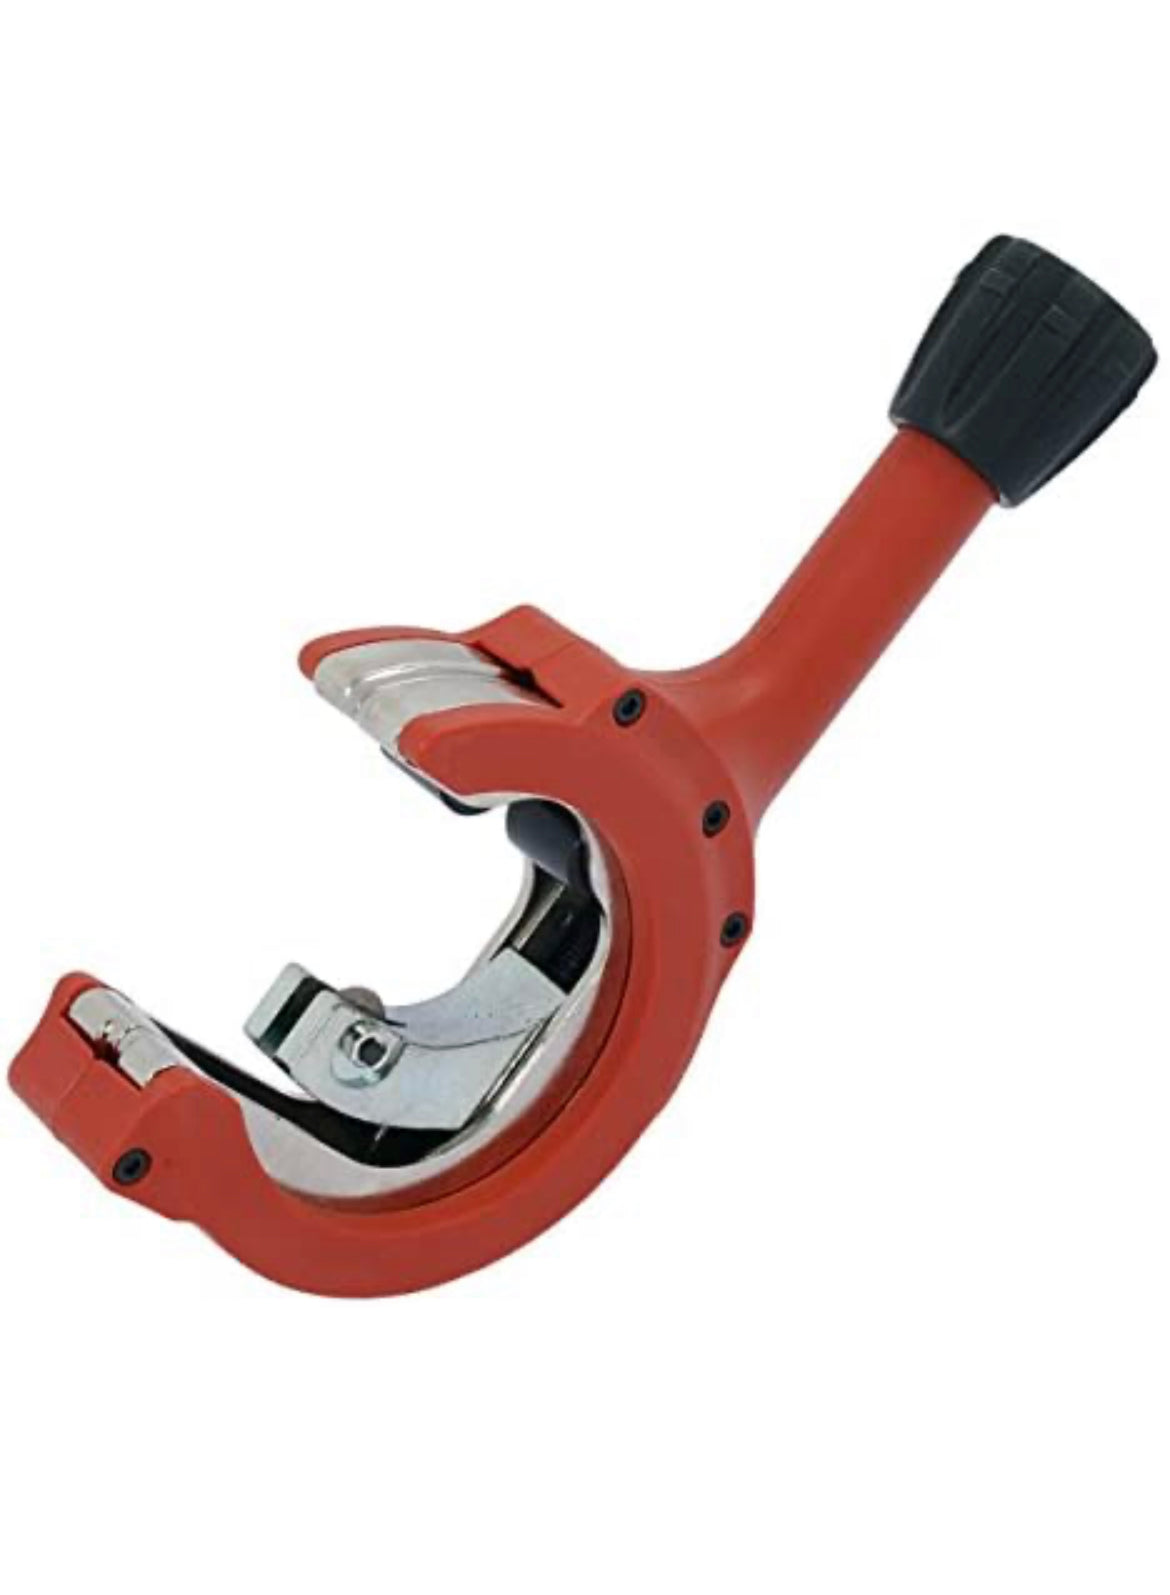 Neilsen CT0756 Extra wide tube cutter / exhaust pipe cutter